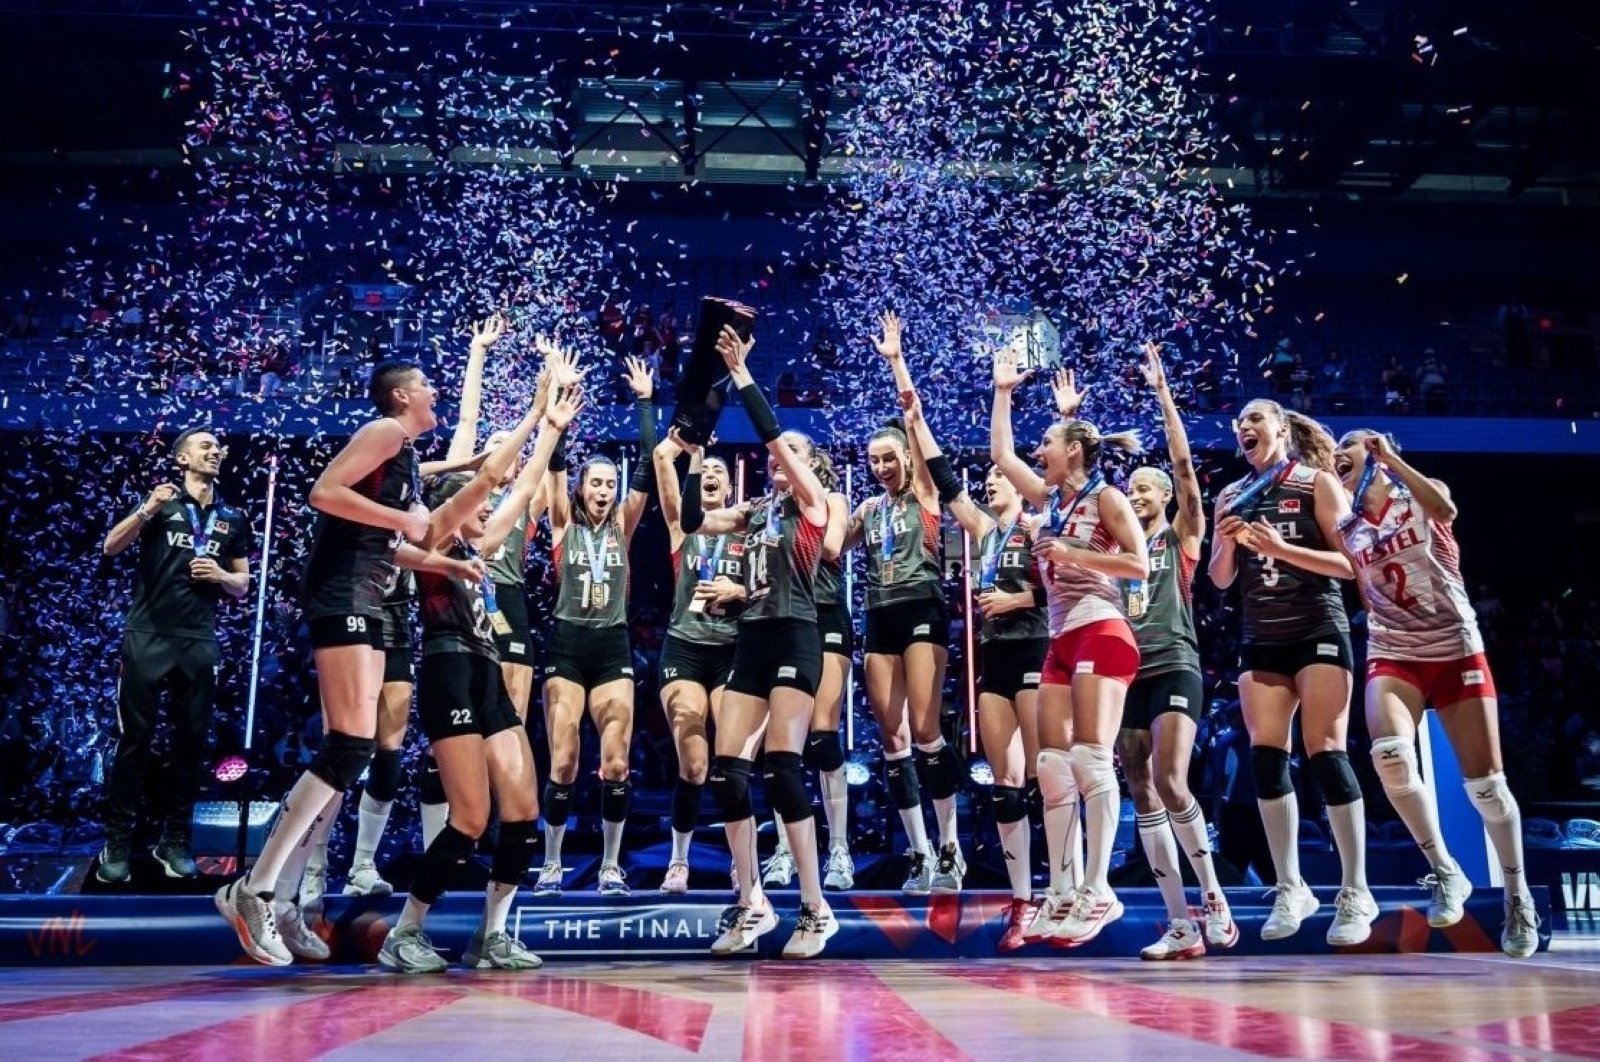 italy women's national volleyball team